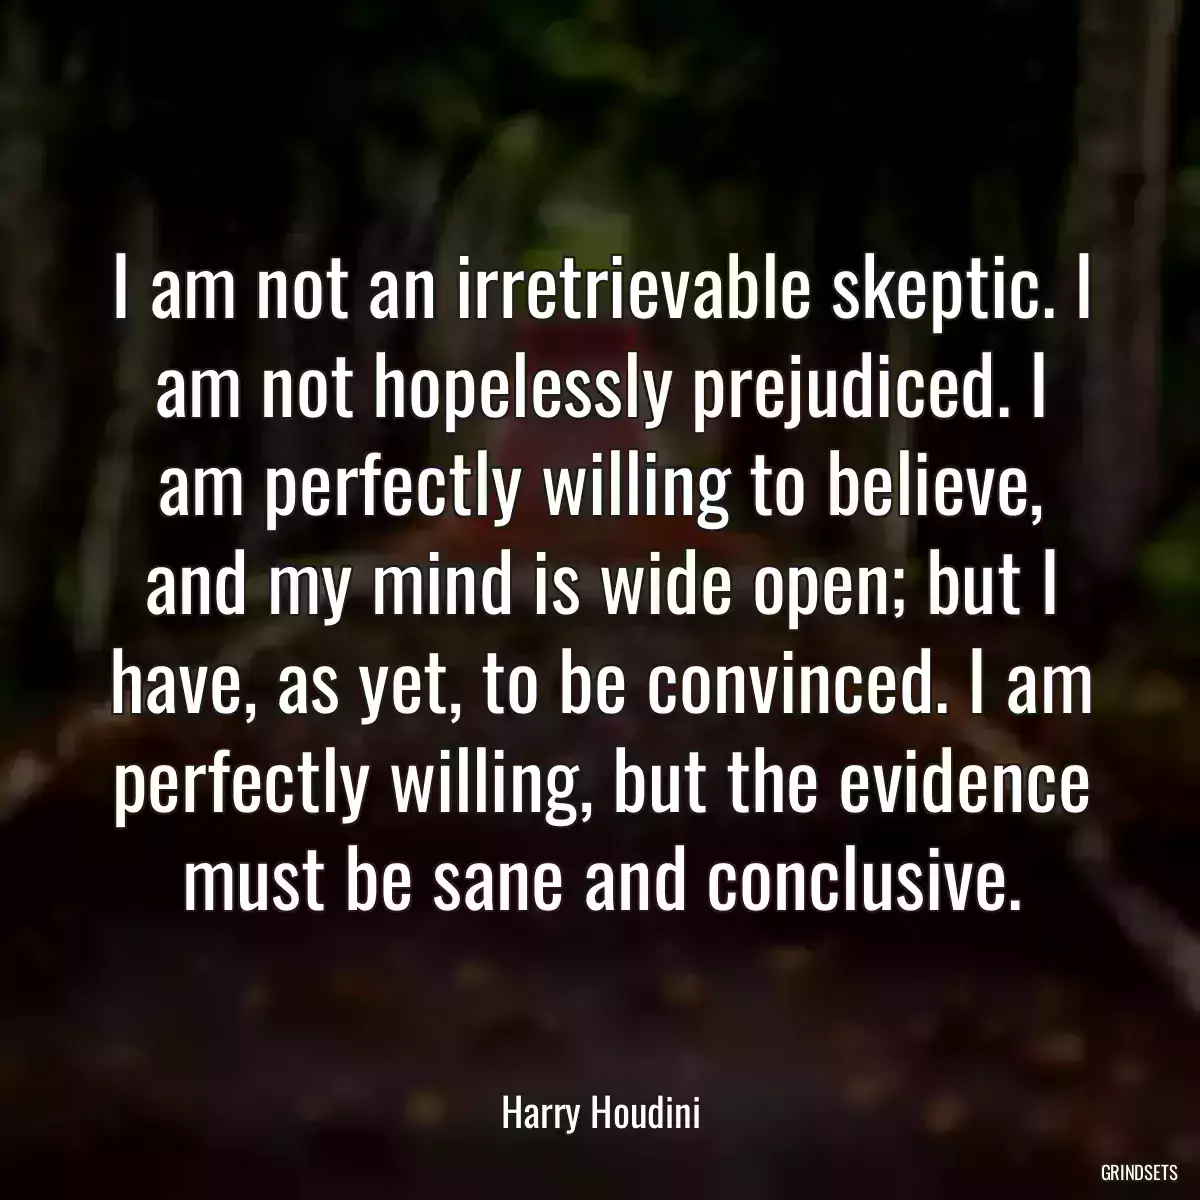 I am not an irretrievable skeptic. I am not hopelessly prejudiced. I am perfectly willing to believe, and my mind is wide open; but I have, as yet, to be convinced. I am perfectly willing, but the evidence must be sane and conclusive.